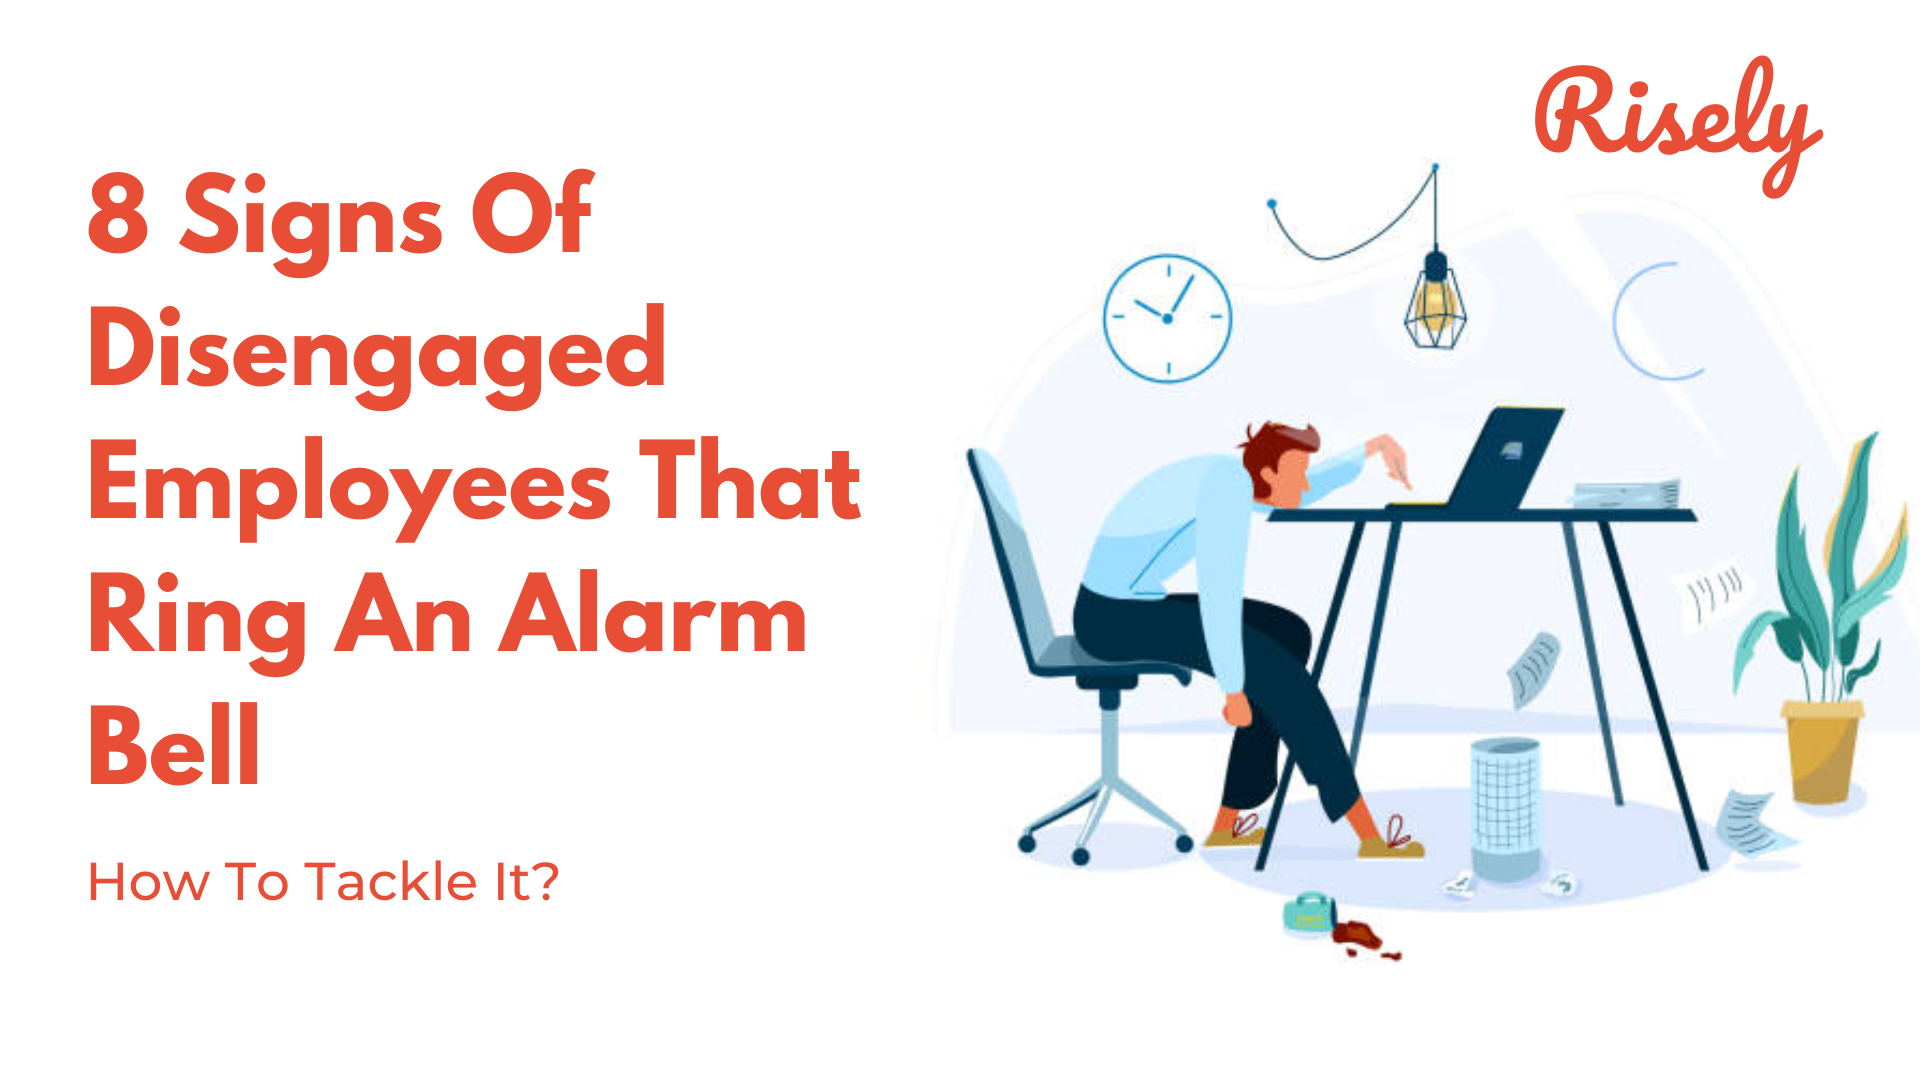 8 Signs Of Disengaged Employees That Ring An Alarm Bell